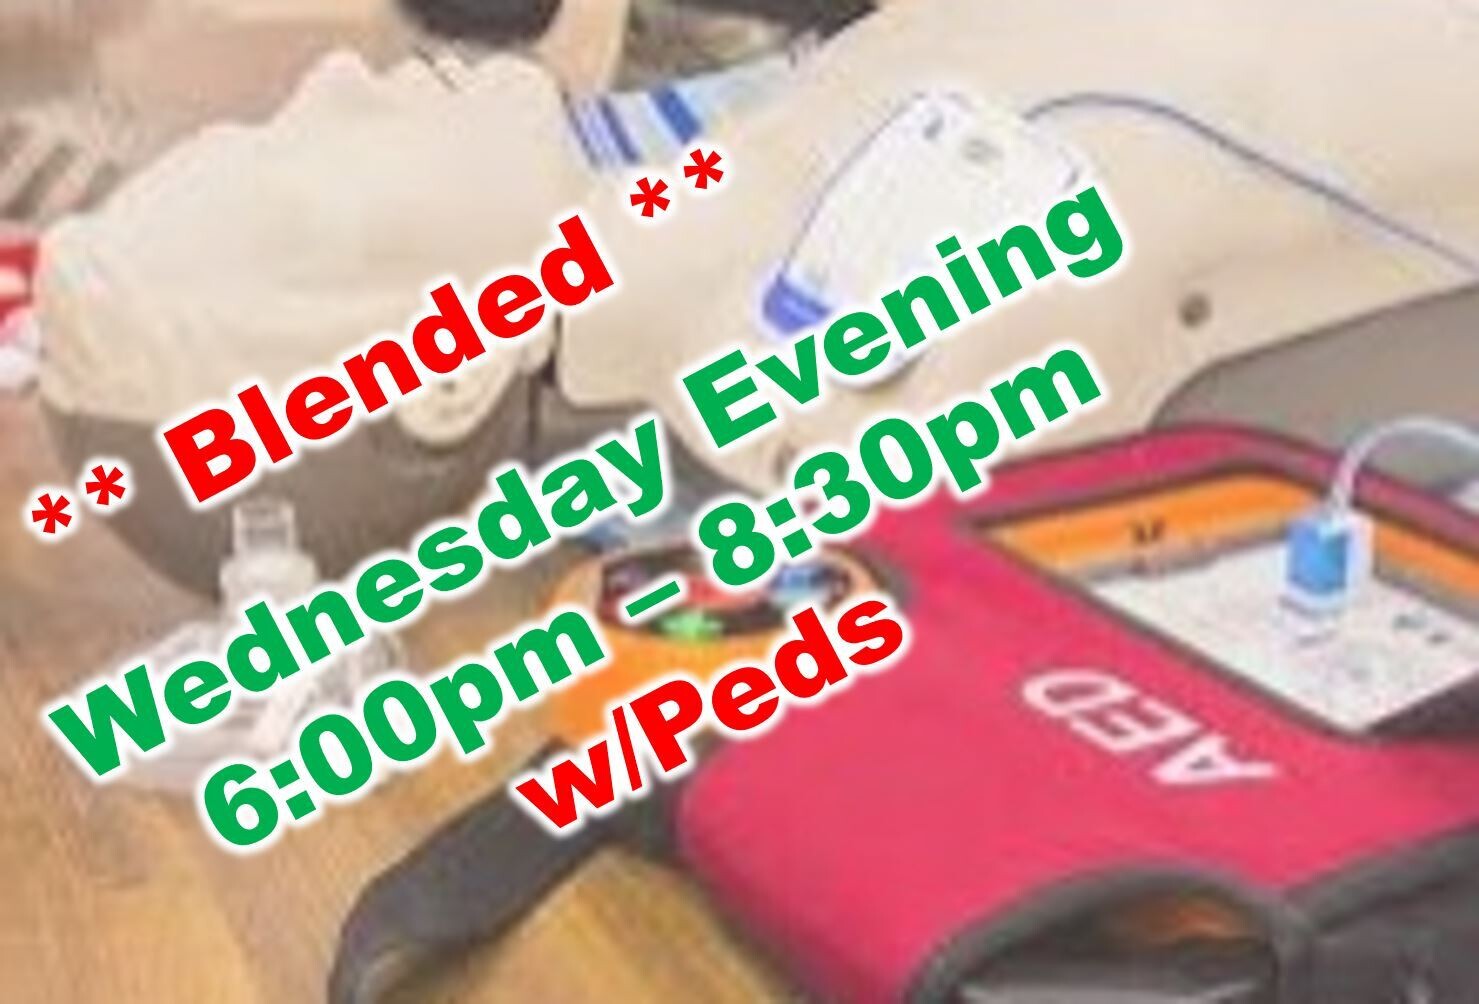 Mar. 16th, 2022 (Wednesday) 6:00pm-8:30pm CPR Class